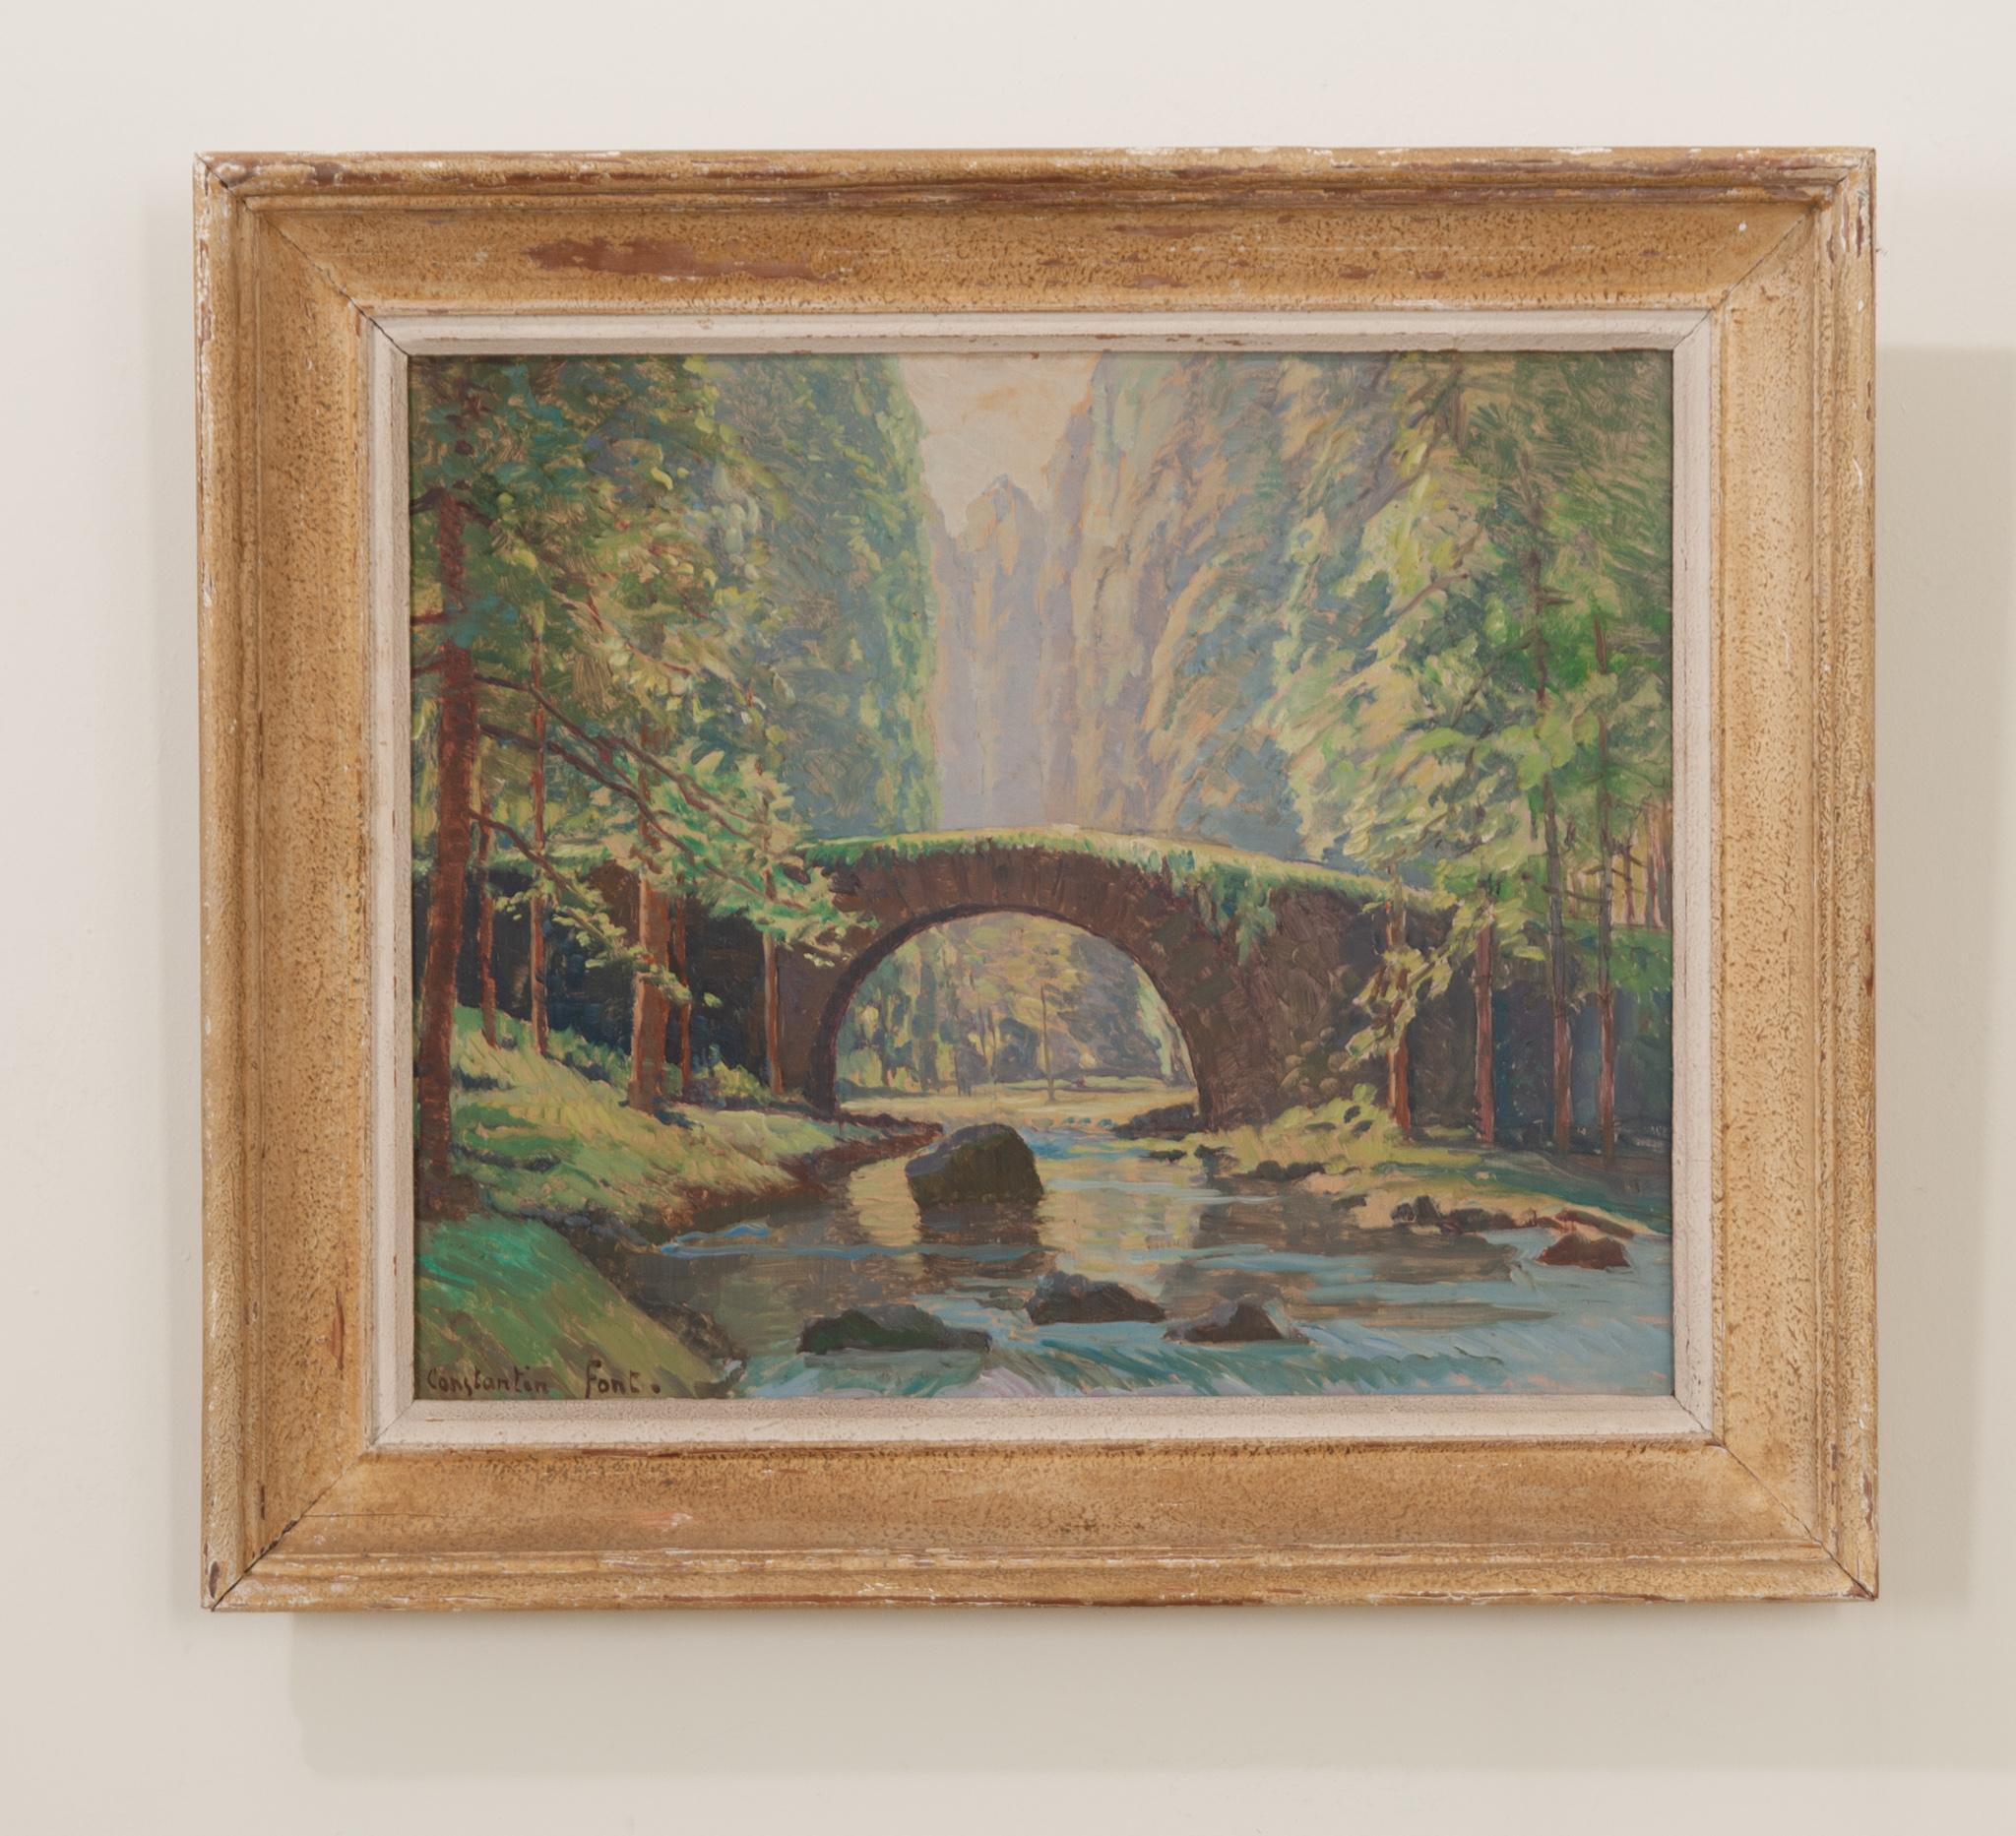 Oil on artist board of a vibrant, idyllic landscape scene from France. Worn painted frame is fixed with a hanging wire. Signed by the artist Constantin Font (1890-1954) in the bottom left hand corner. A sticker on the backside lists the placement of